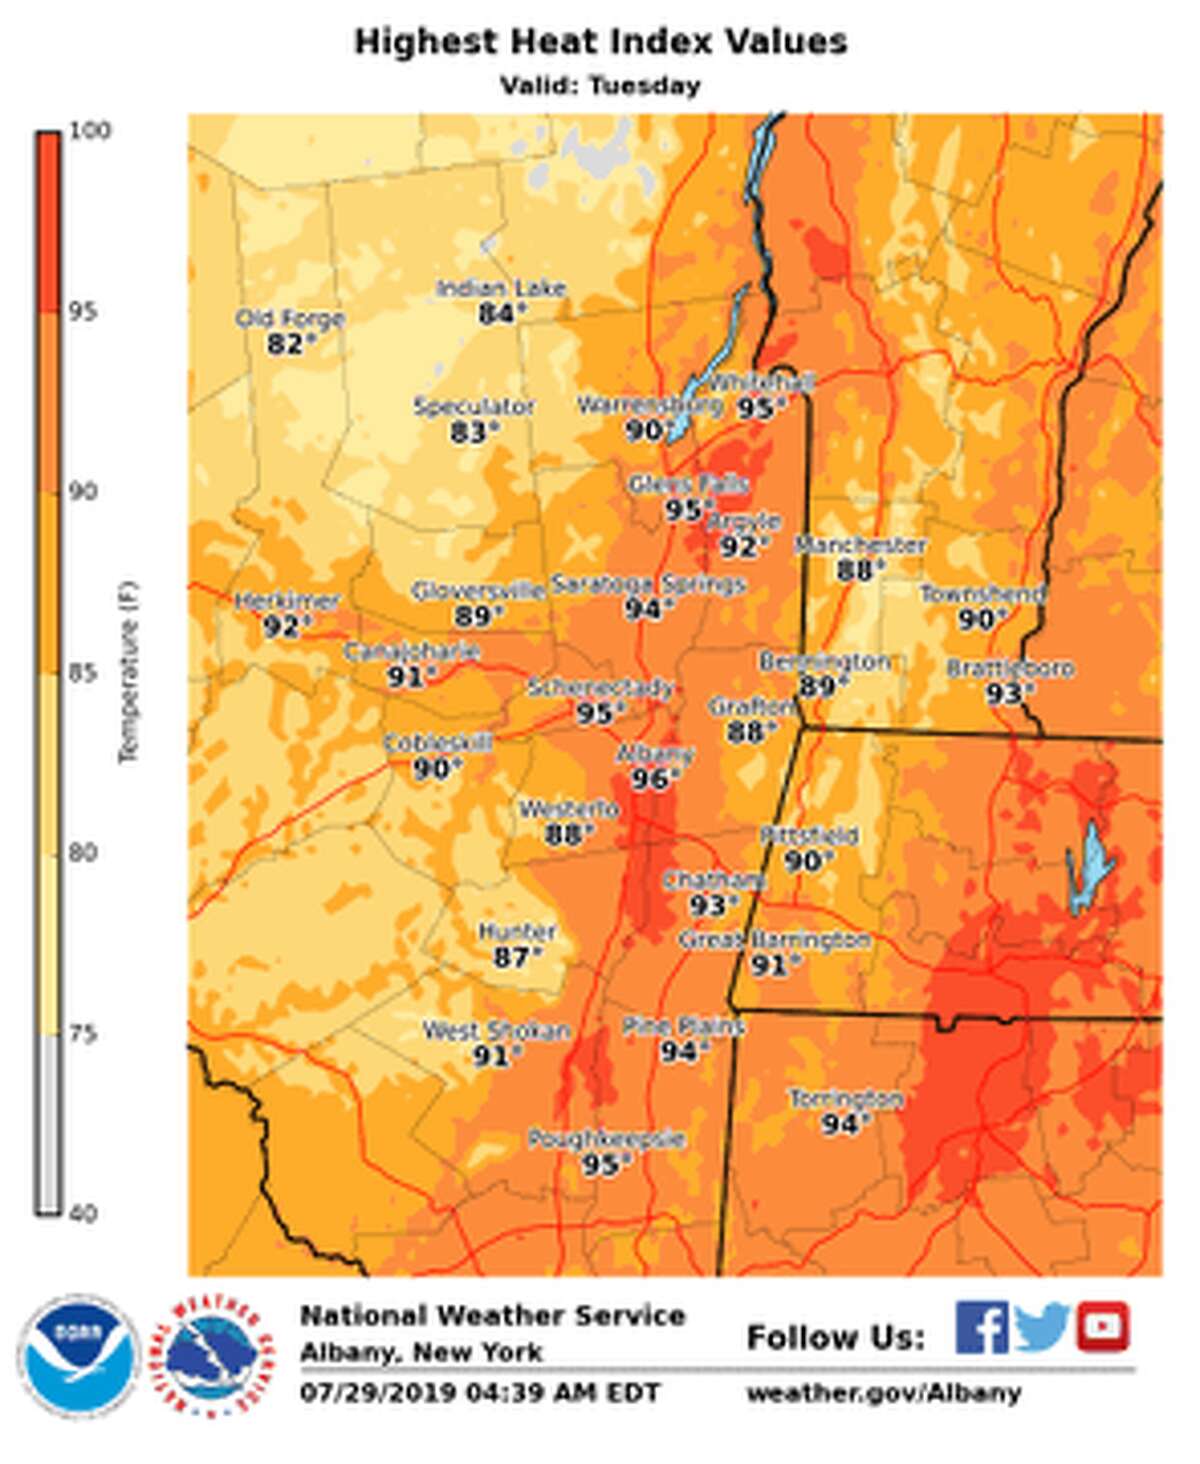 The National Weather Service issued a heat advisory for Tuesday in the Capital Region, with heat index values in the mid- to upper 90s..